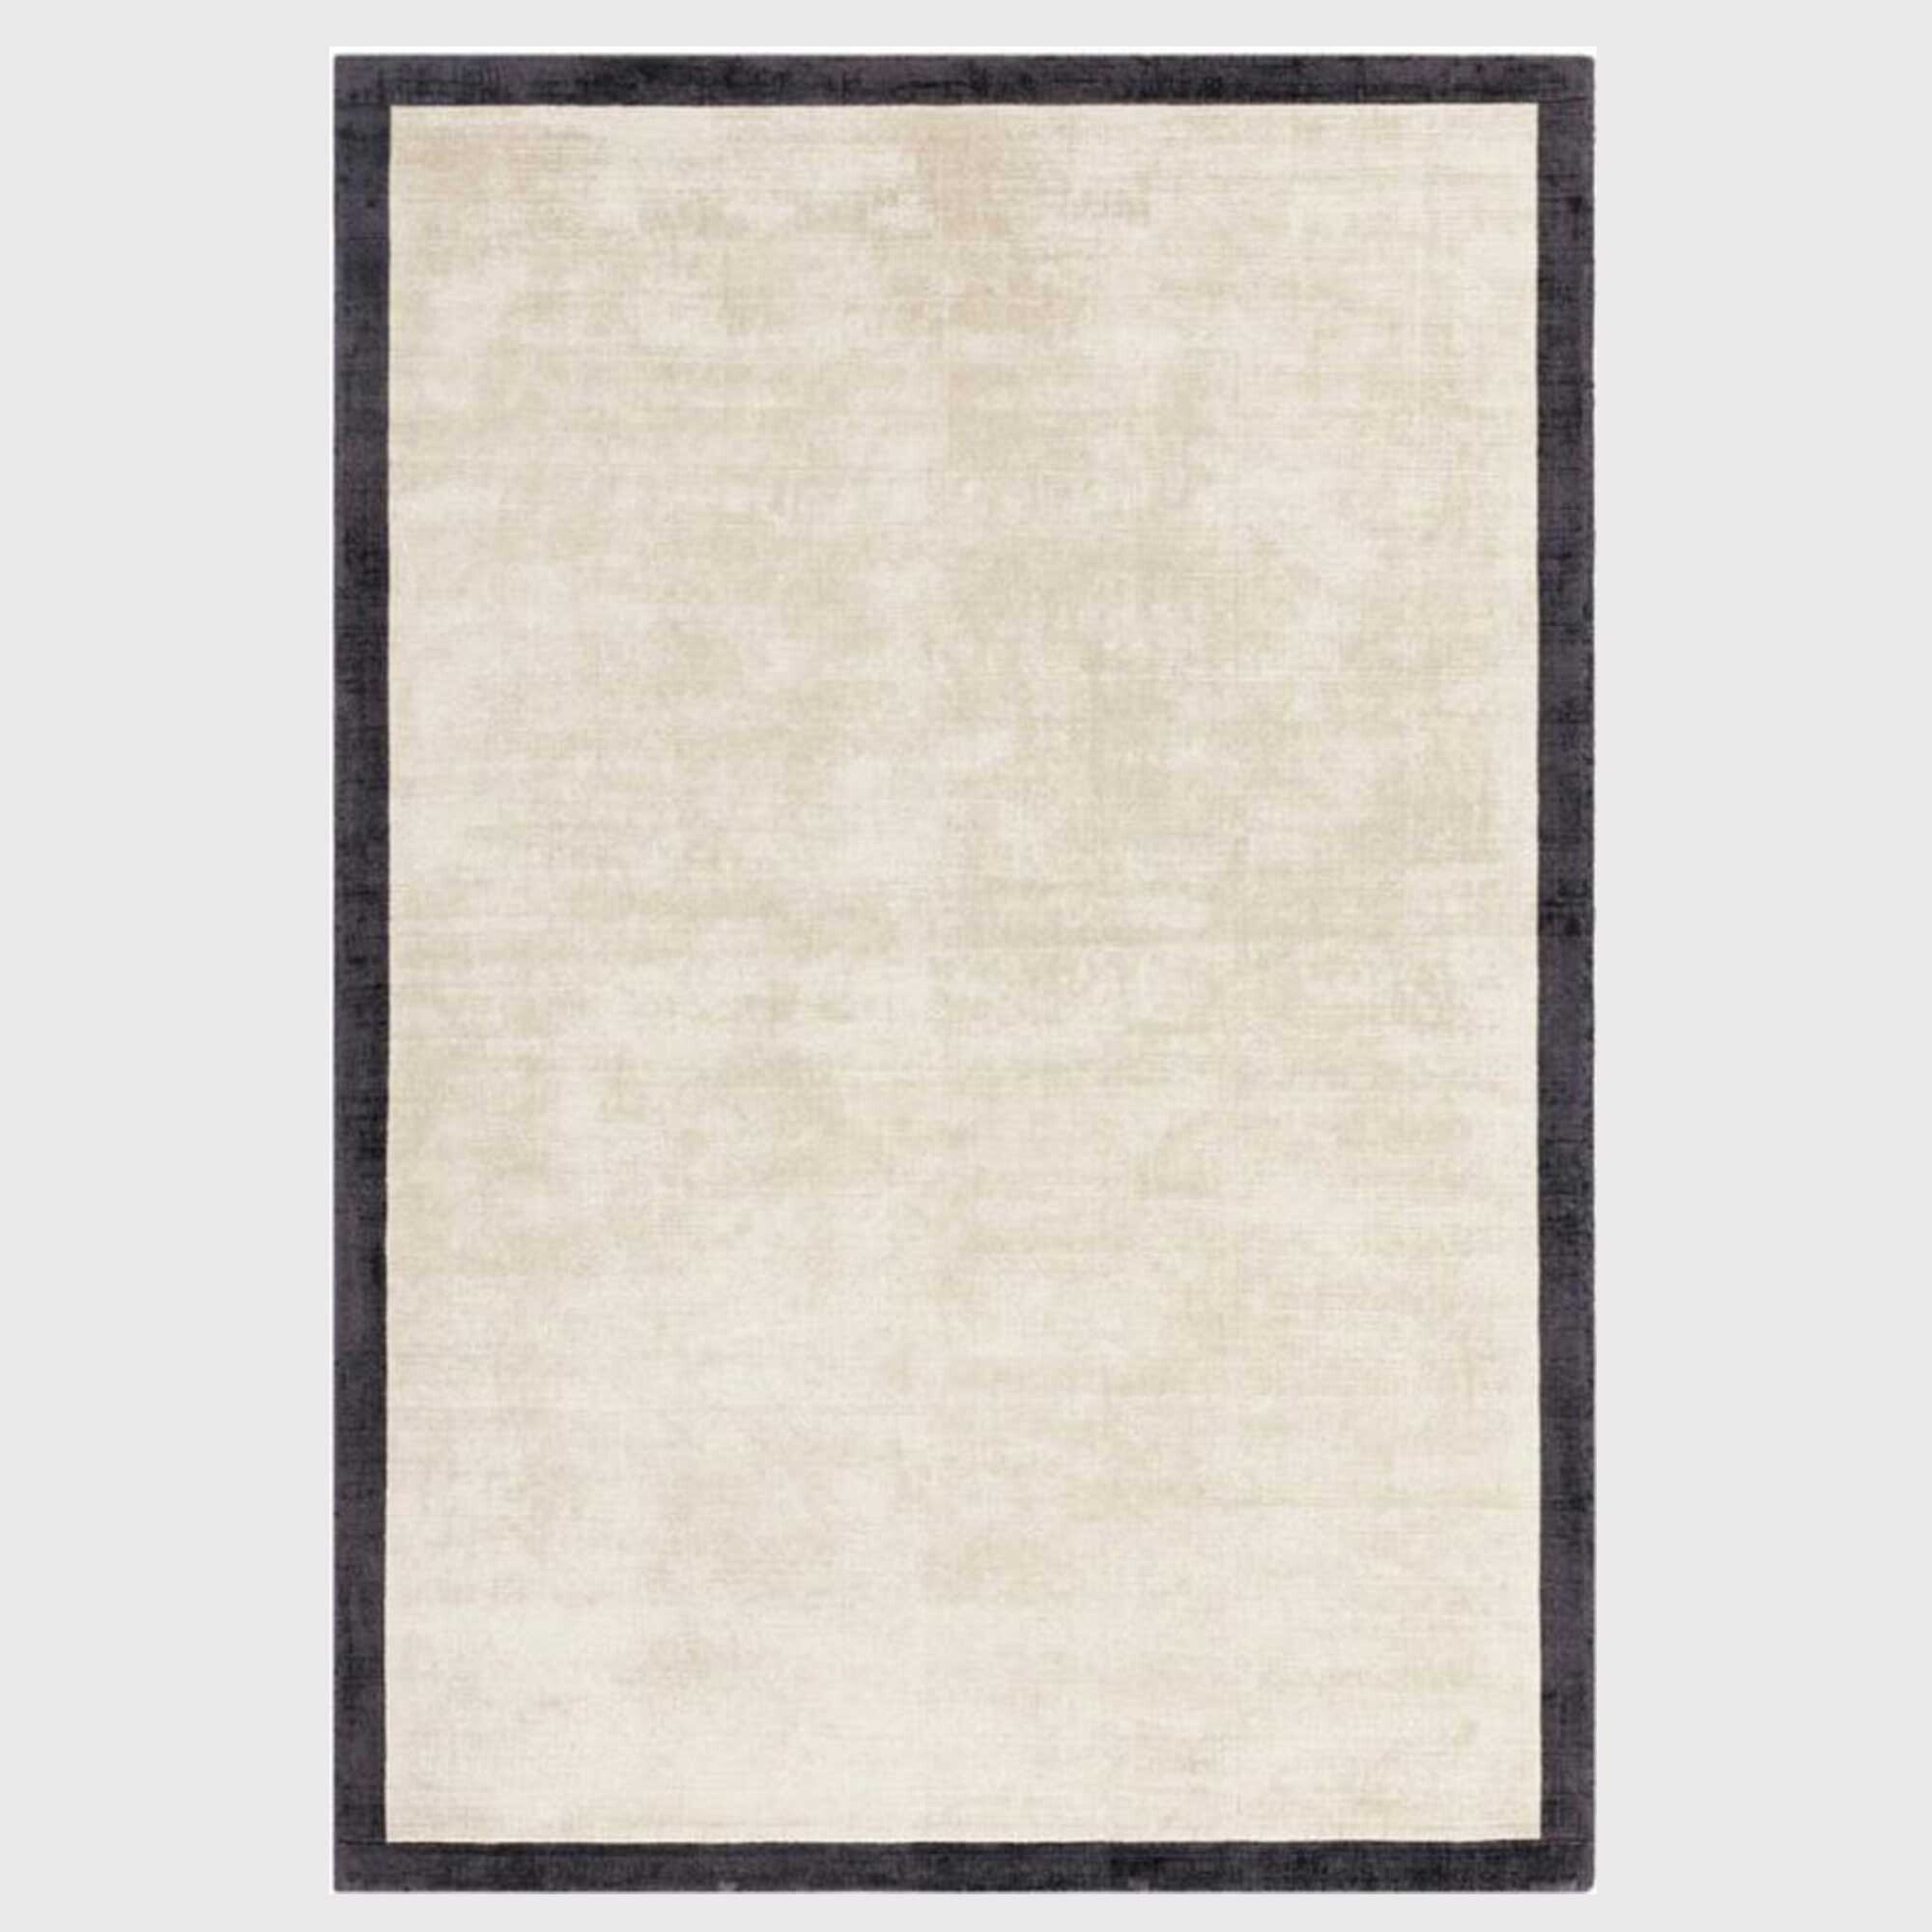 Tyde Border Rug 120x170cm Putty/Charcoal, Square, Neutral Viscose | Barker & Stonehouse